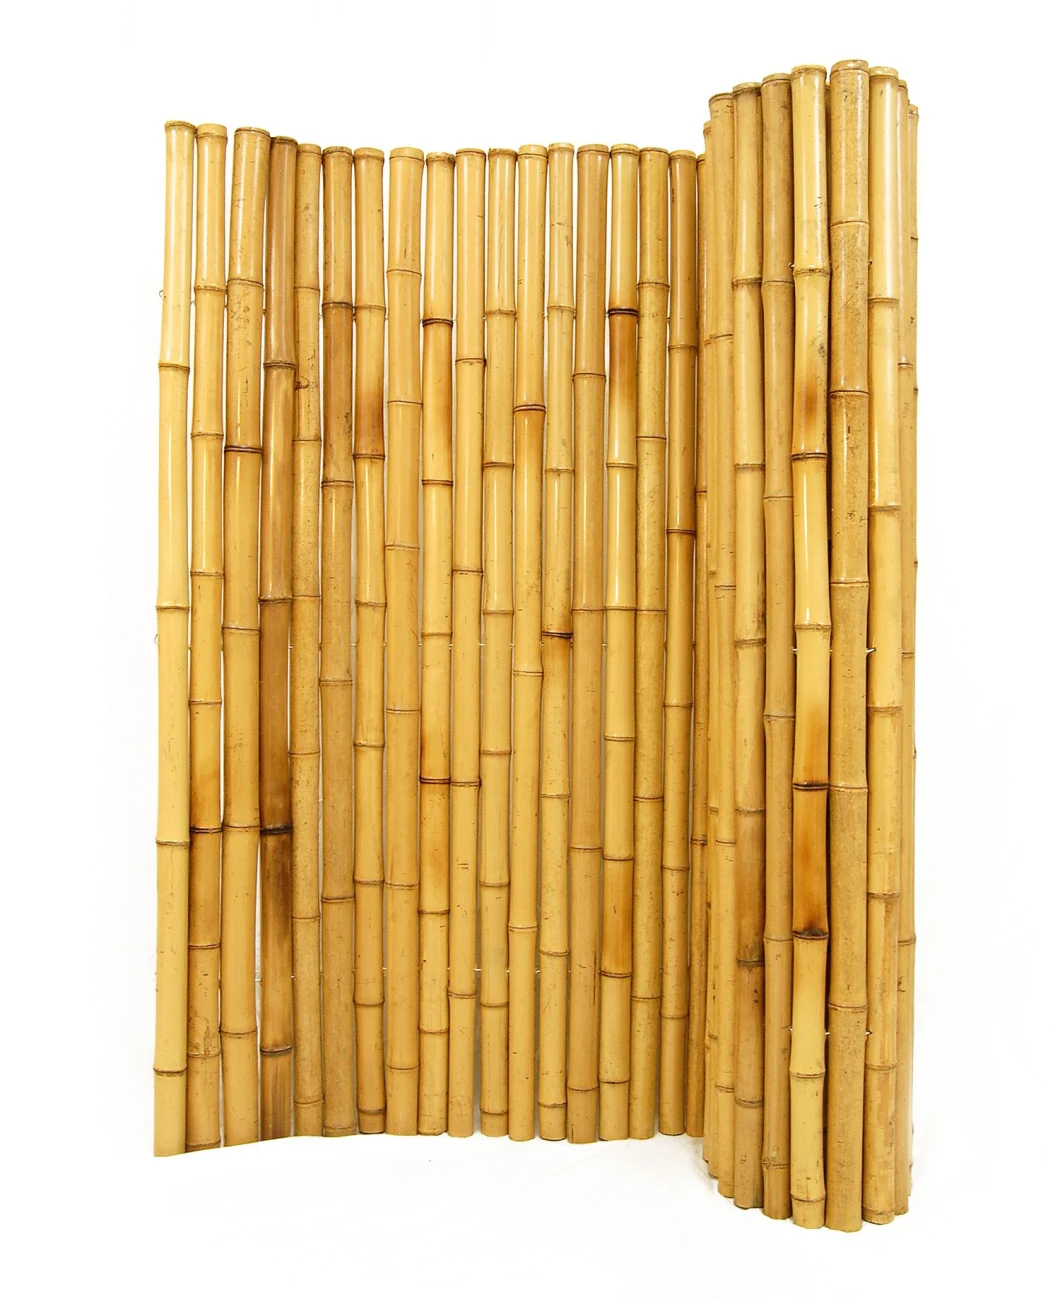 Bamboo Fence Garden Fencing Panel with Natural, Black, Mahogany, Brown Colors